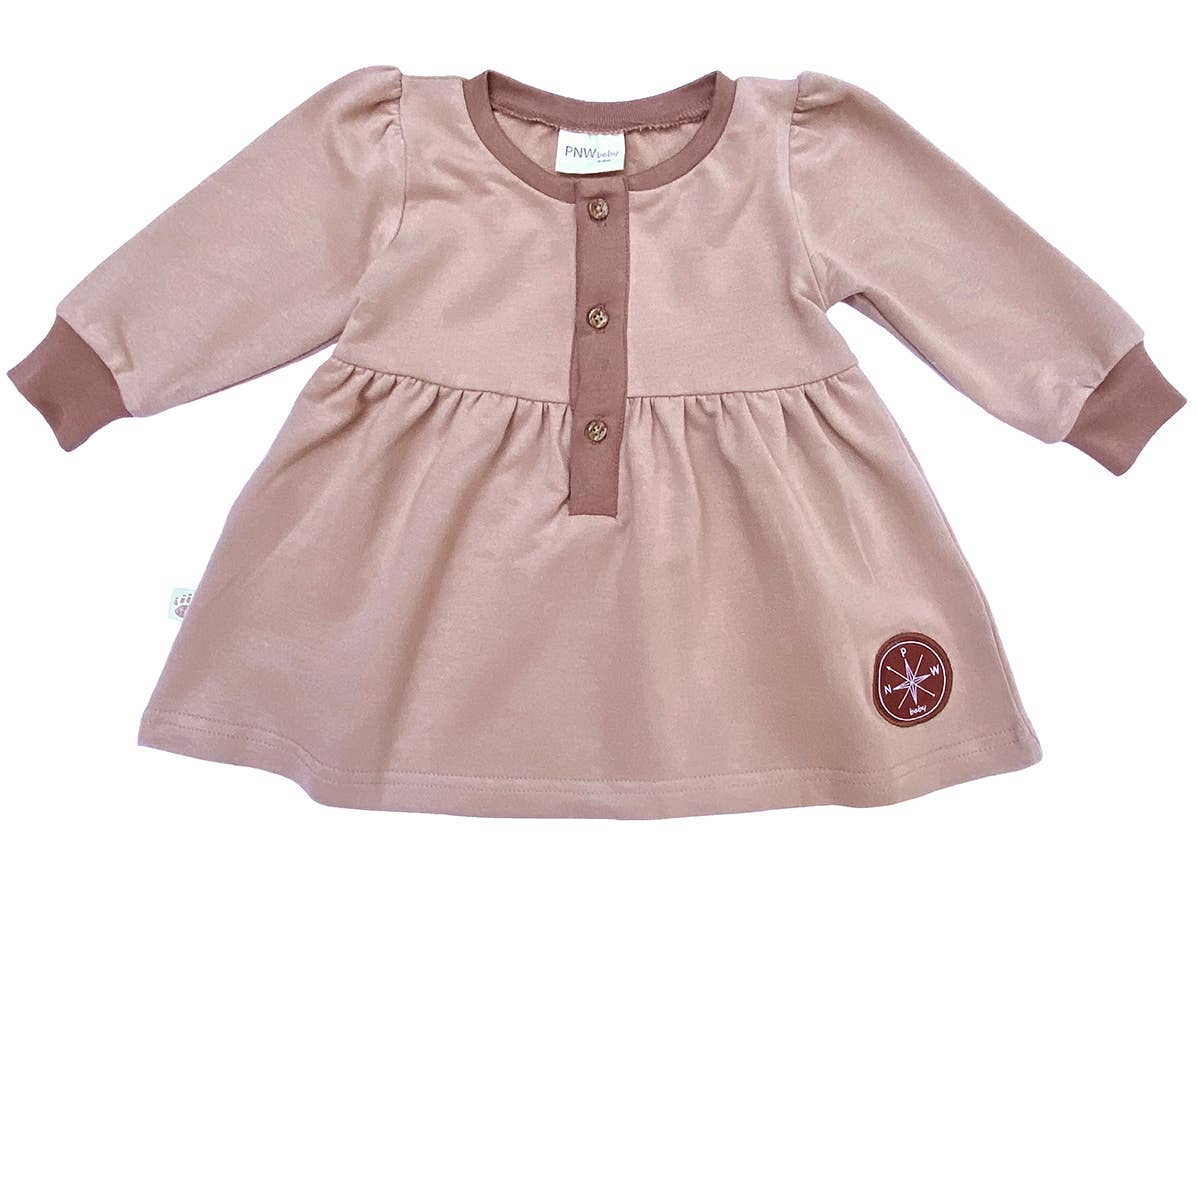 PNW Baby Button Dress- Rose: 18-24m